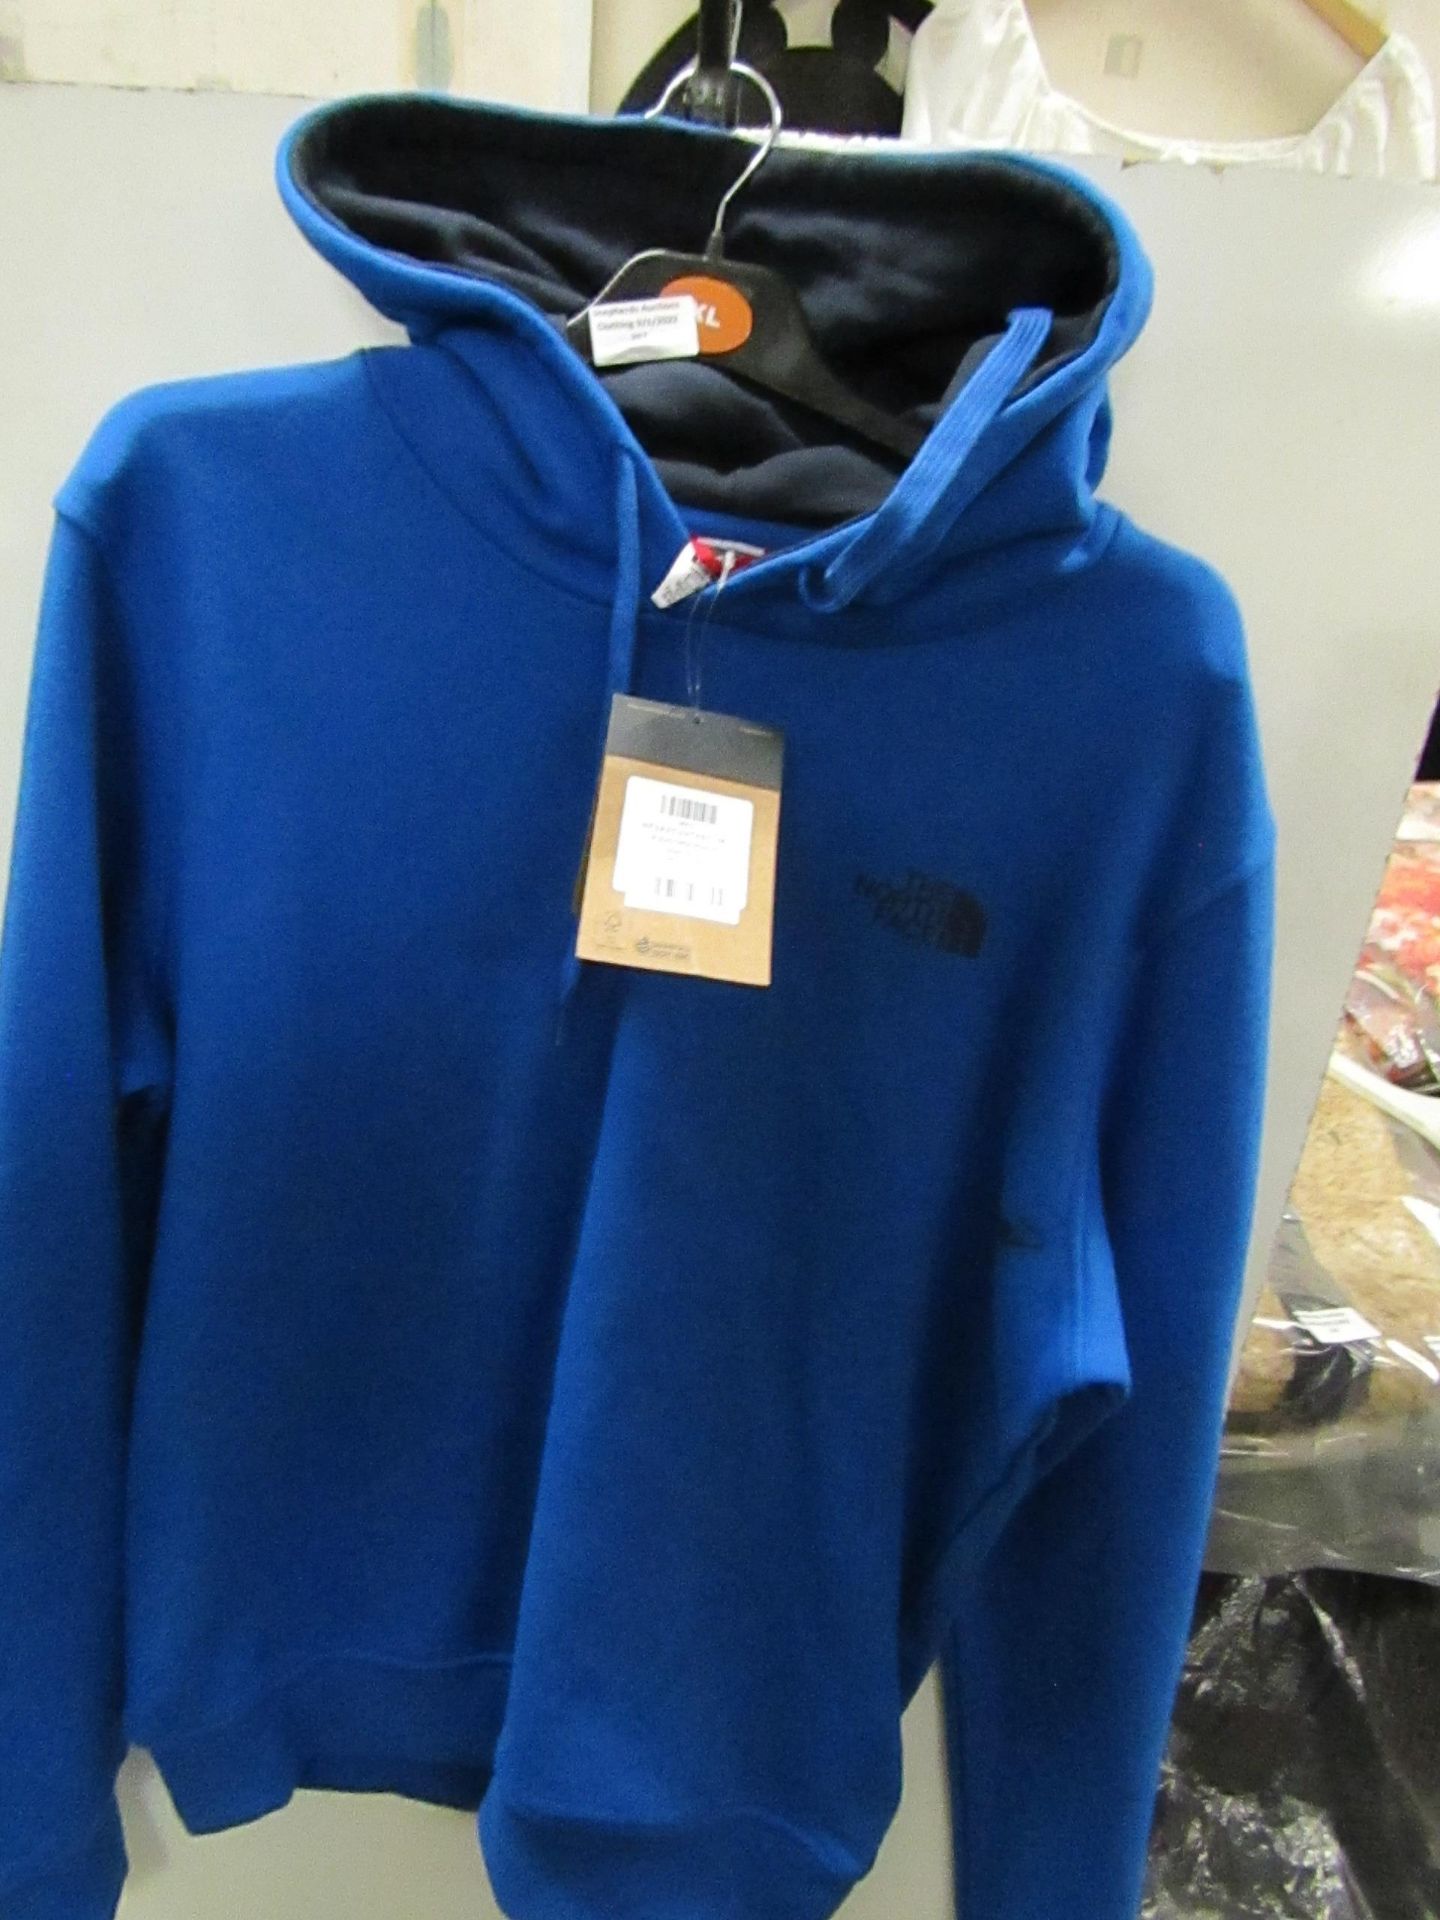 The North Face Hoody Blue Size M ( Has Got A Mark On The Front )Otherwise Unworn With Tags